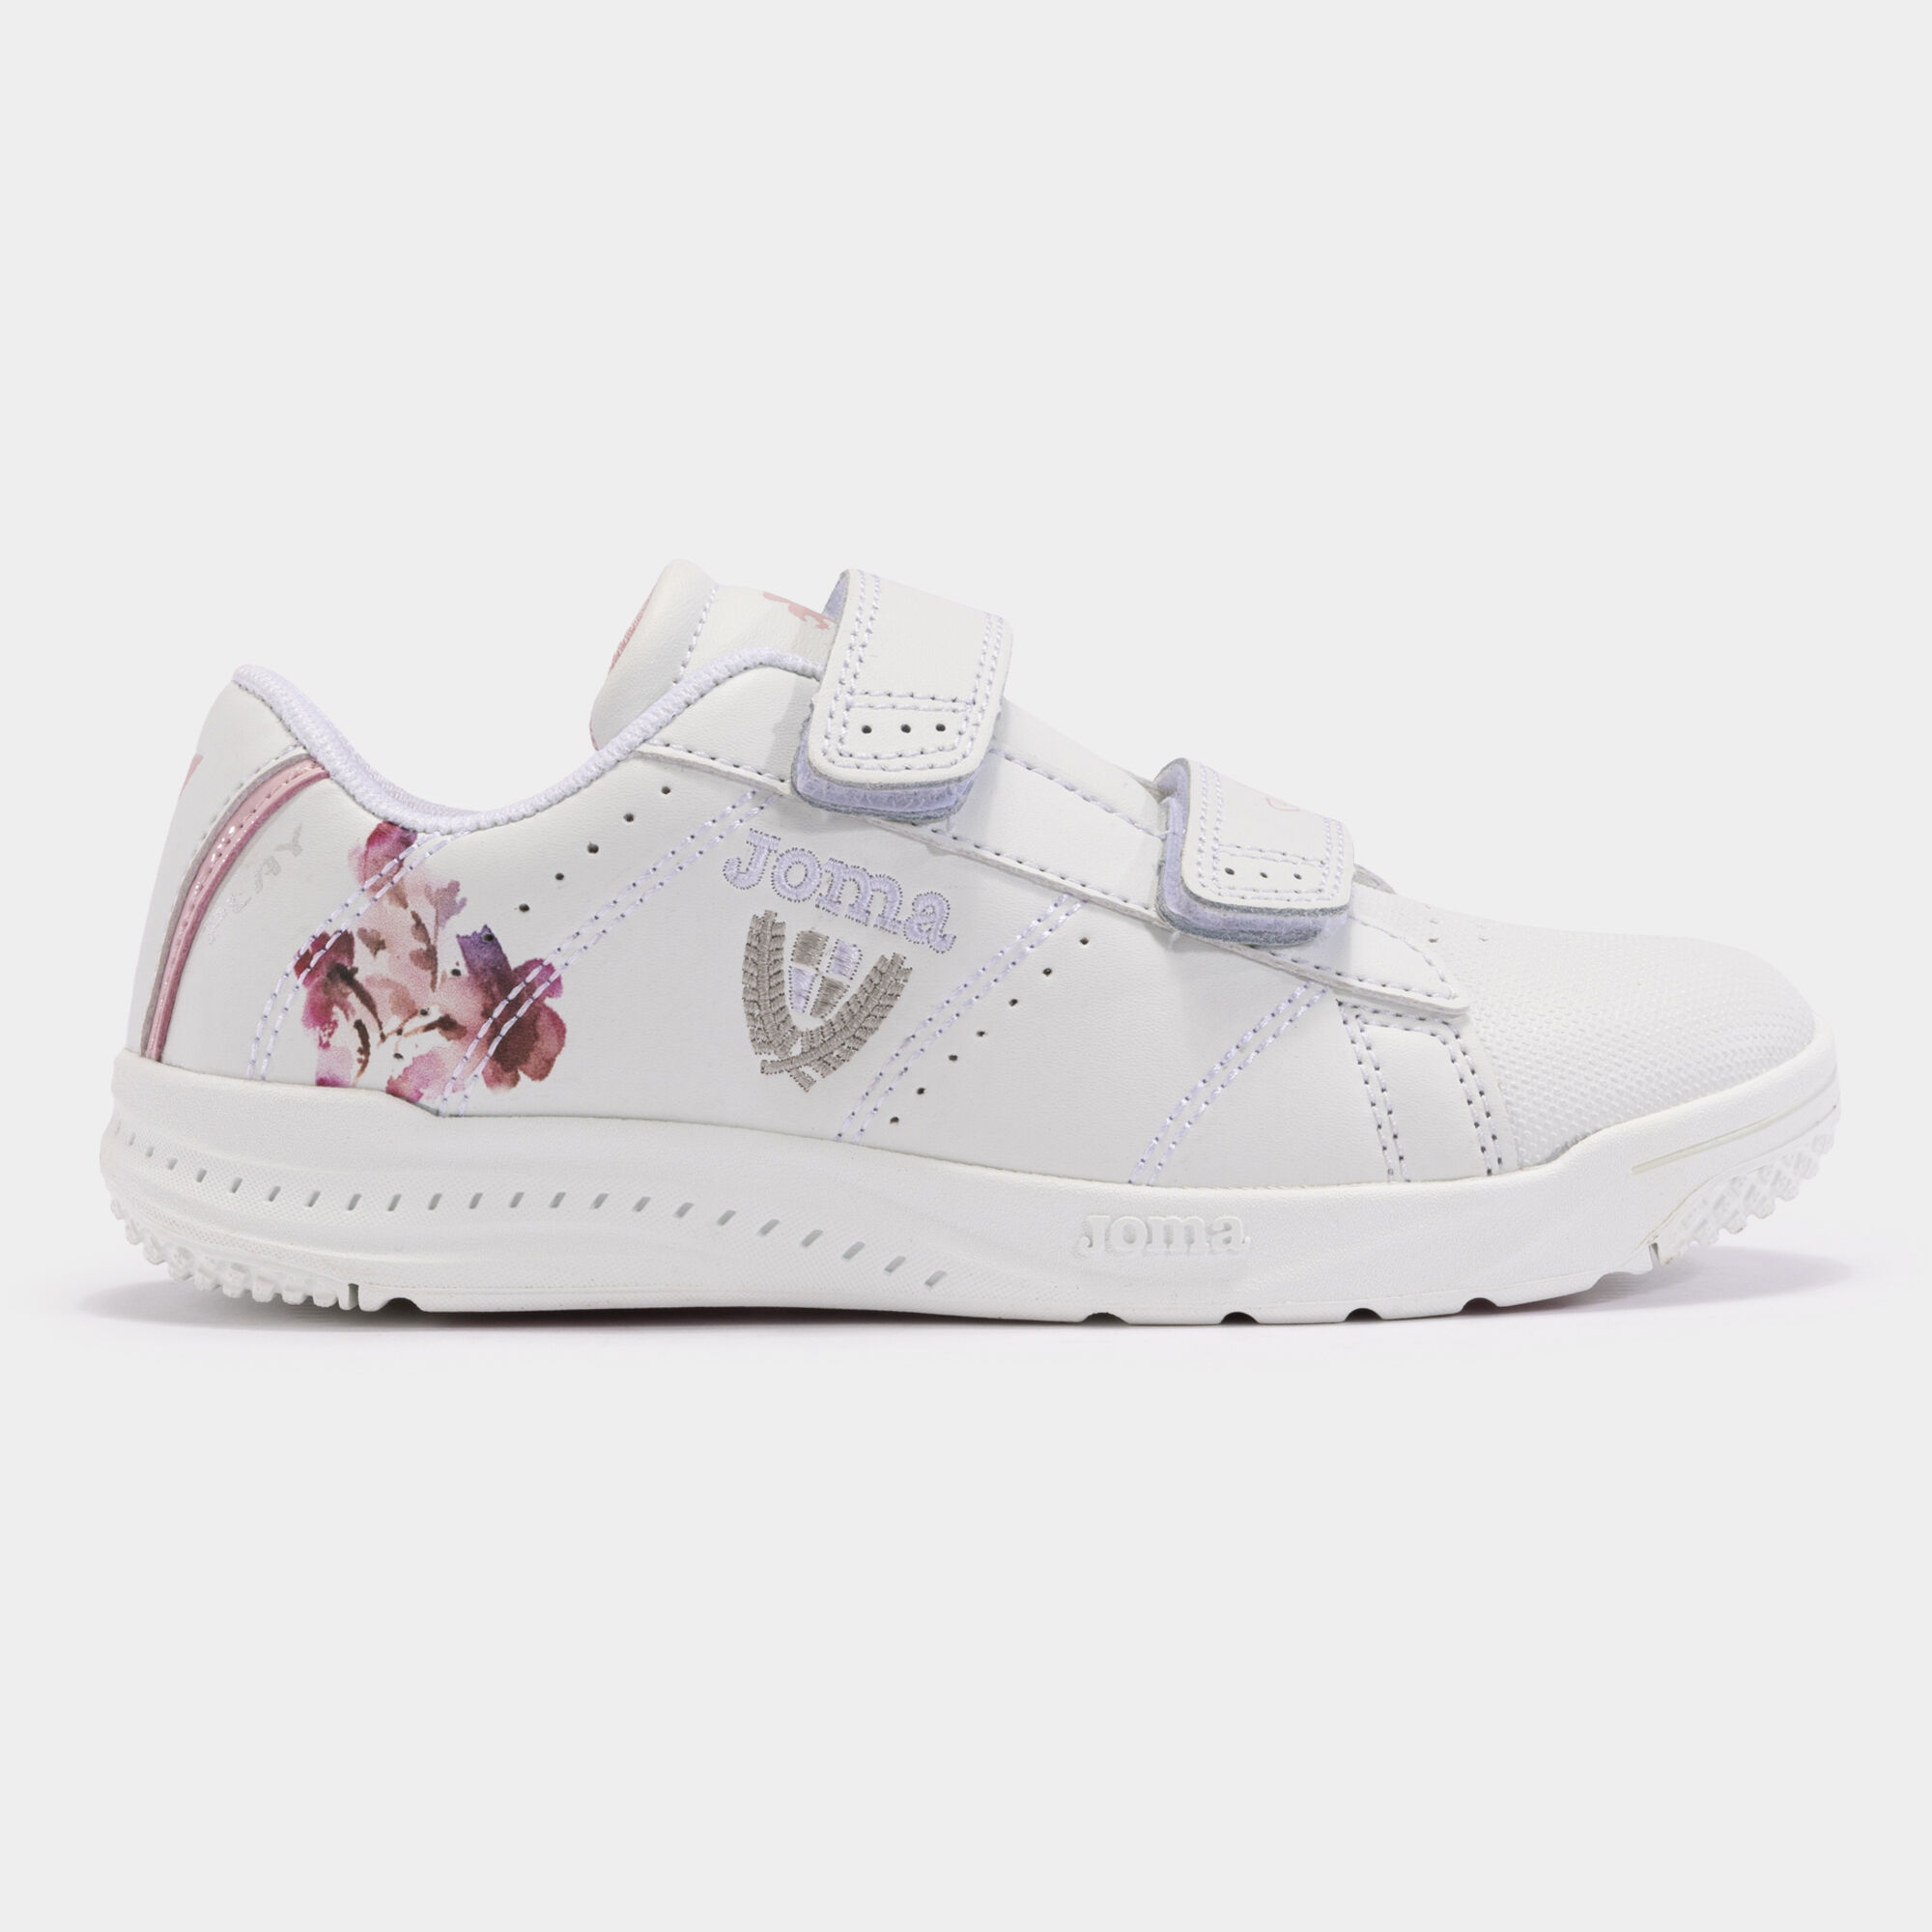 Chaussures casual W.Play Jr 24 junior blanc rose